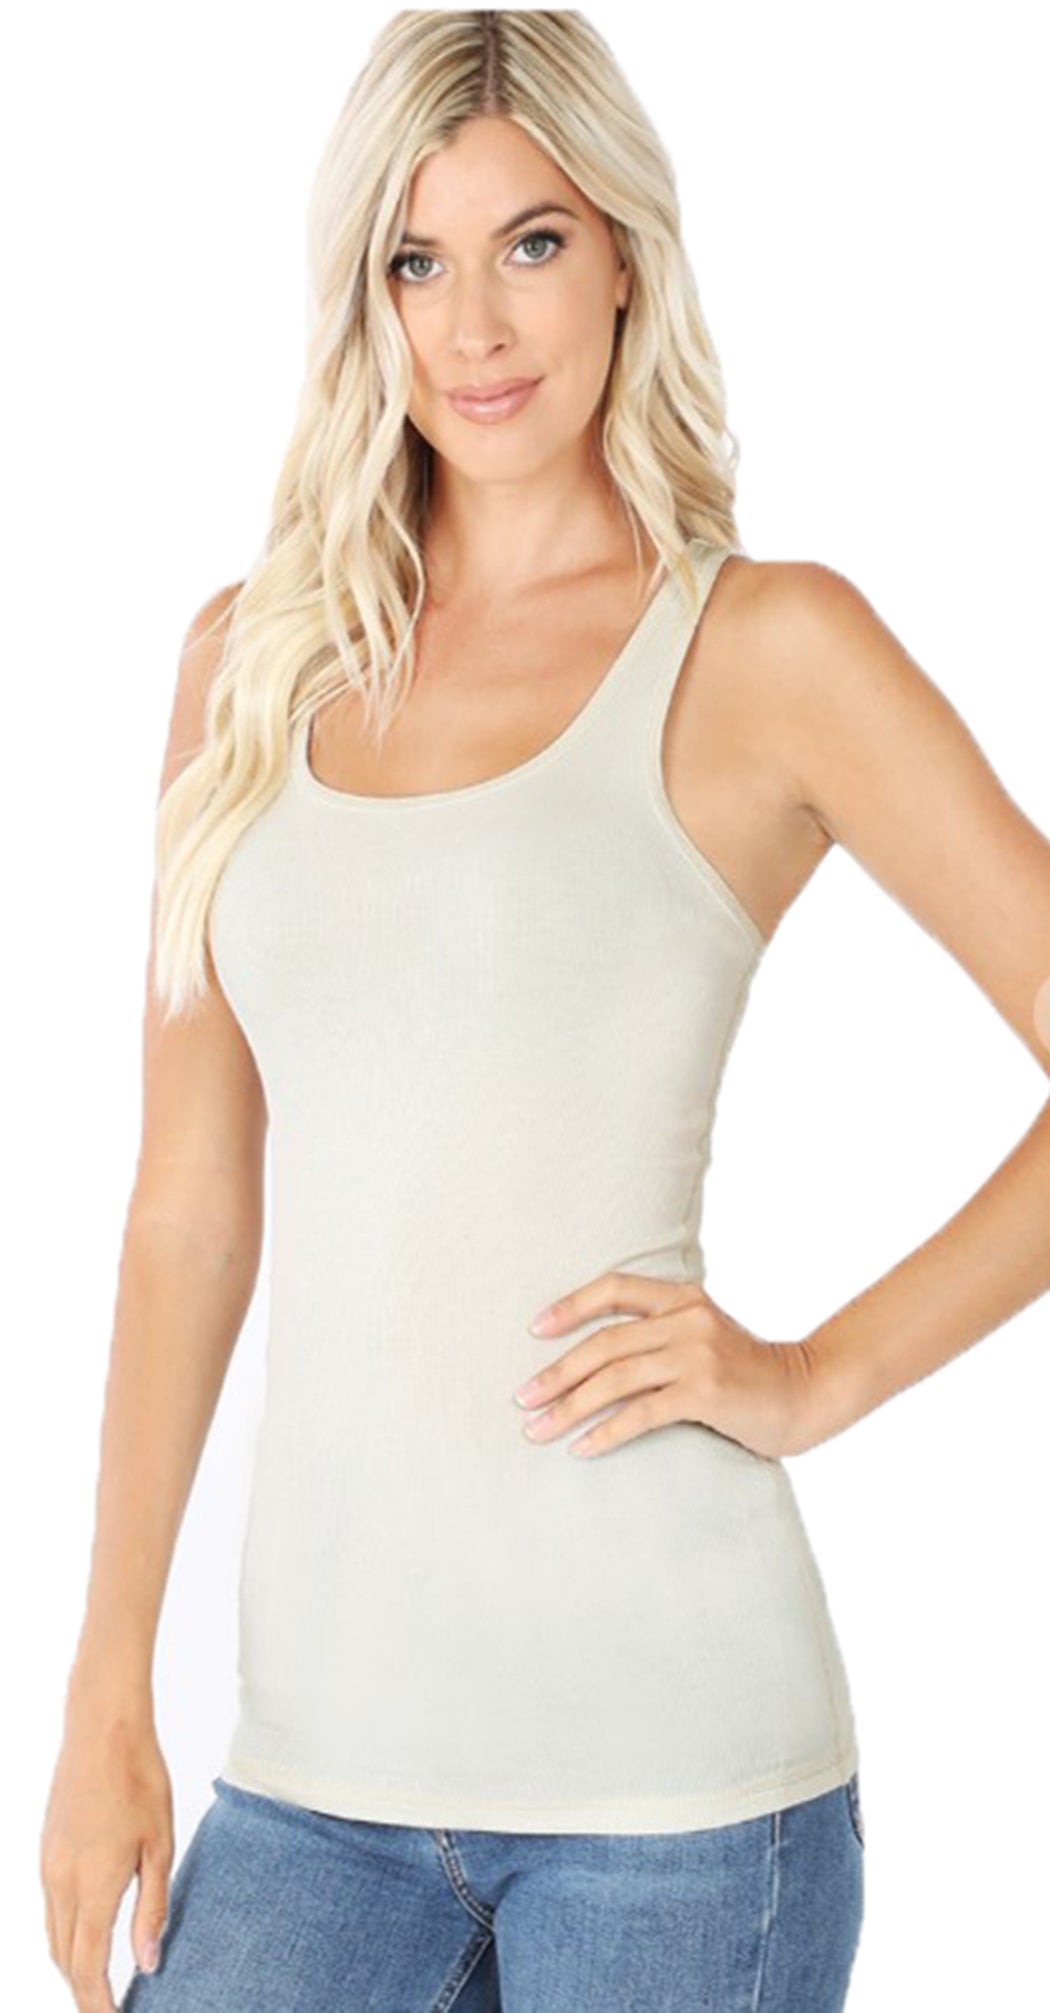 Women Lightweight Cotton Scooped Neckline Stretchy Racerback Ribbed Tank top (Regular size)